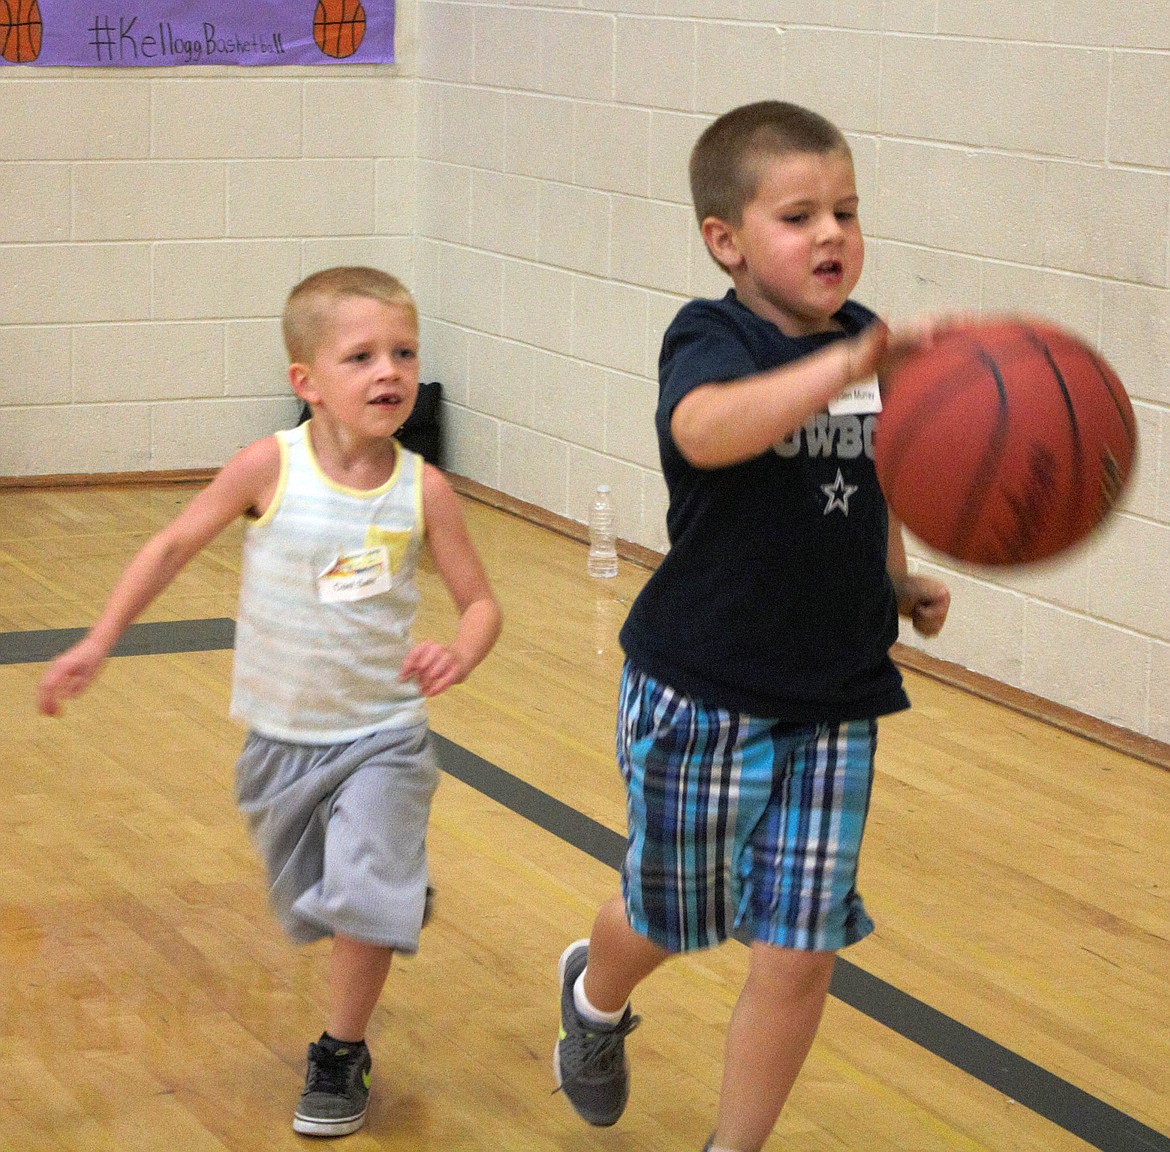 Campers were able to show off their basketball skills during the camp's basketball sessions.